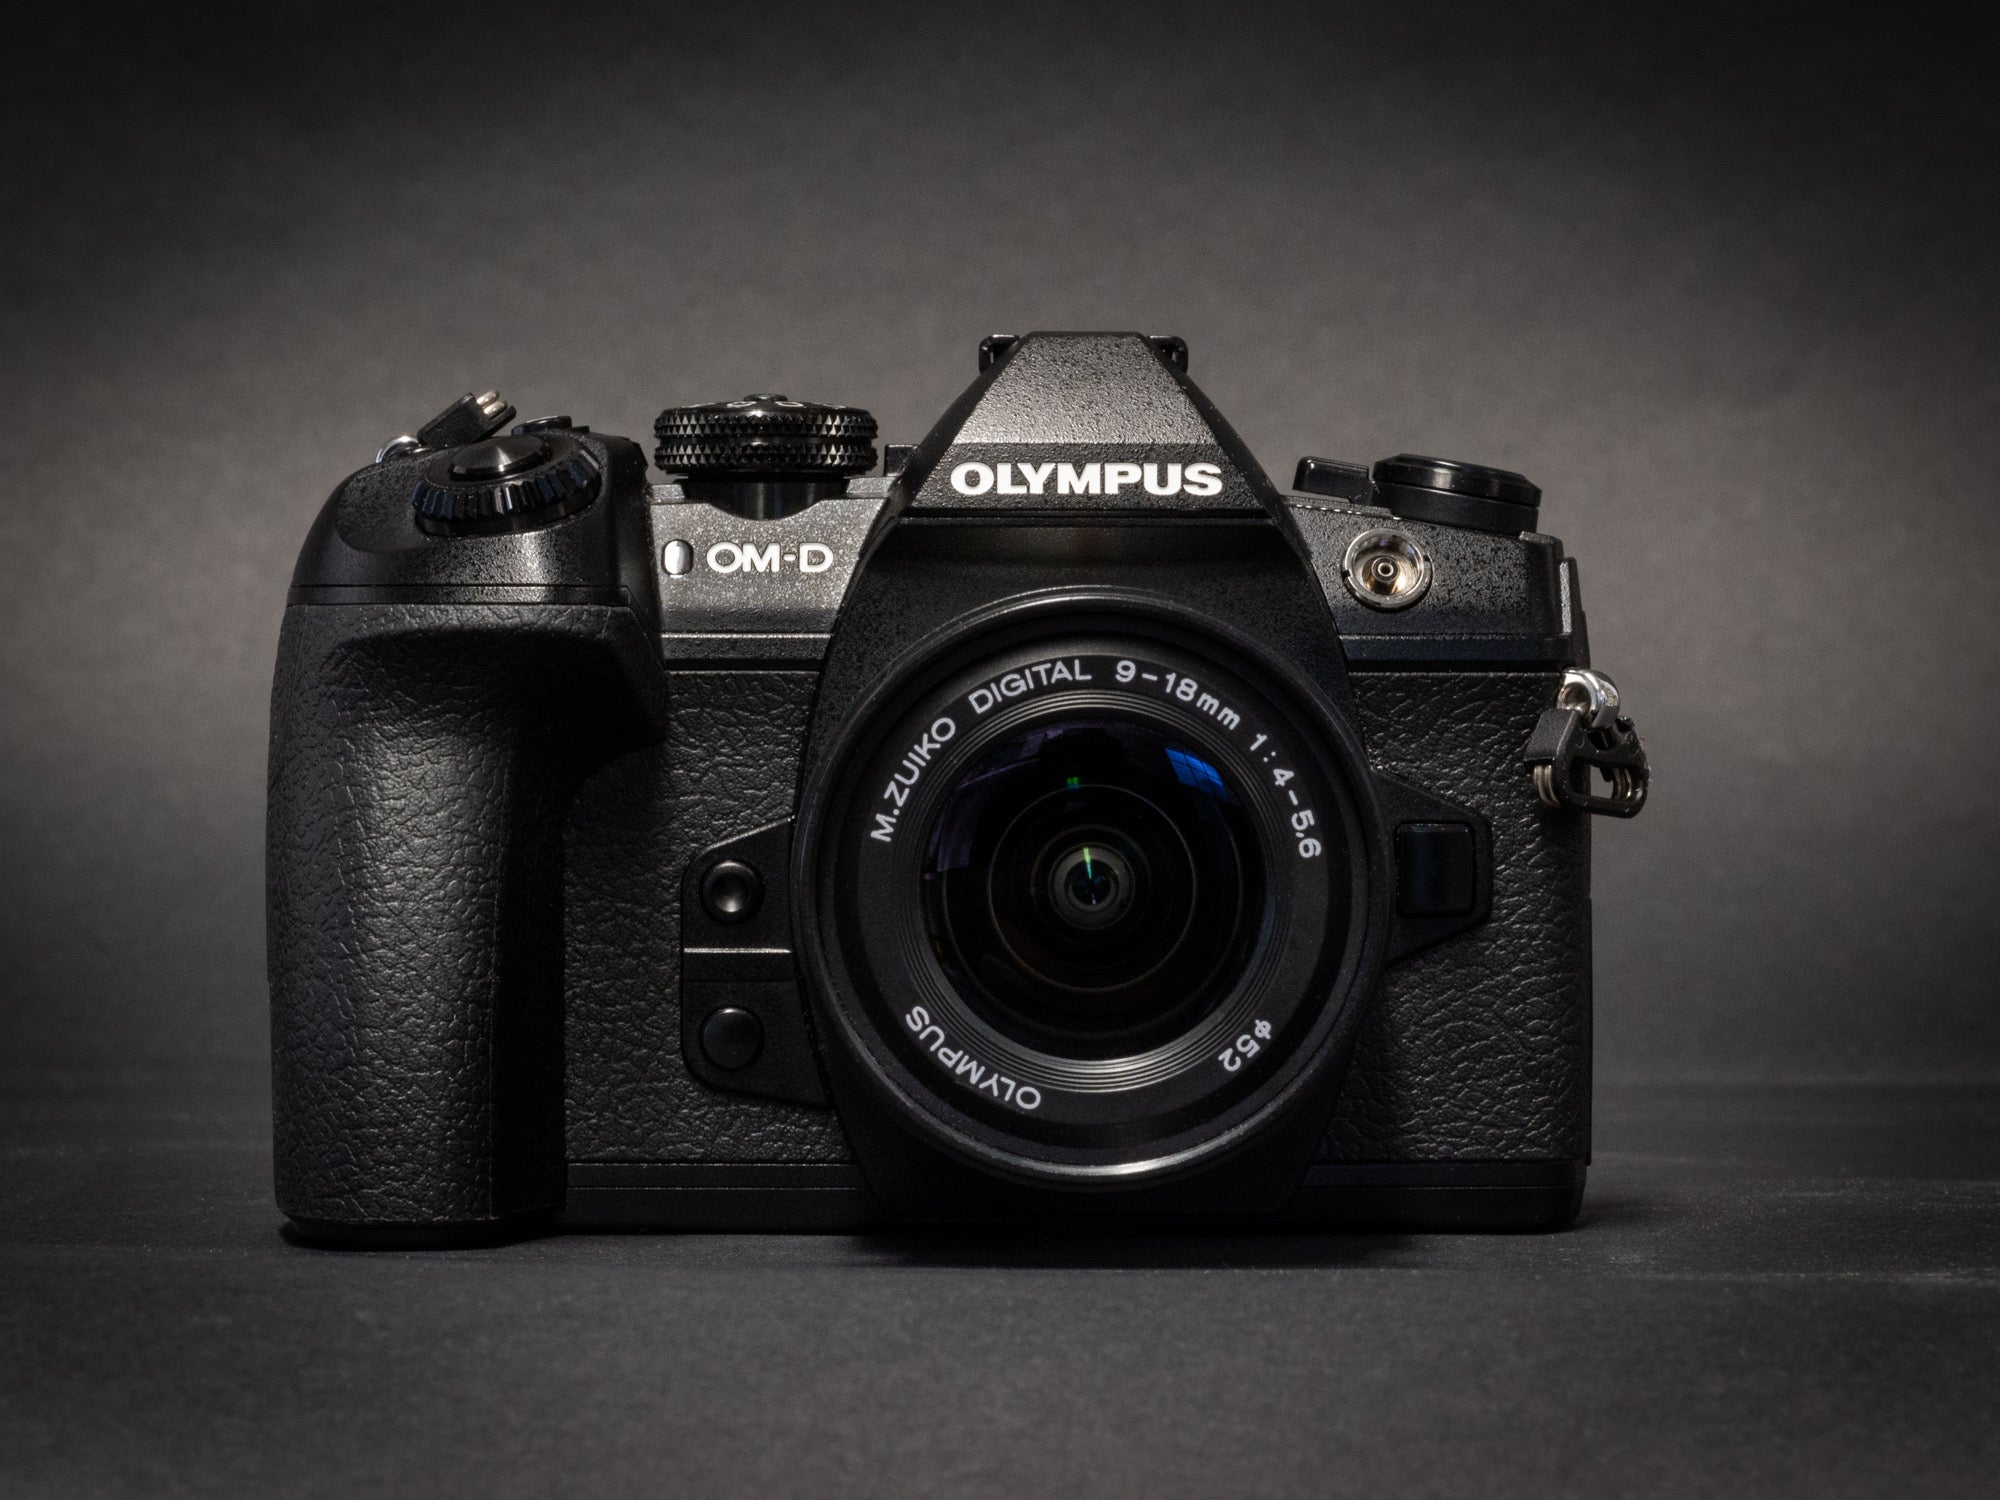 Olympus Update: Brand Name and Existing Models to Continue